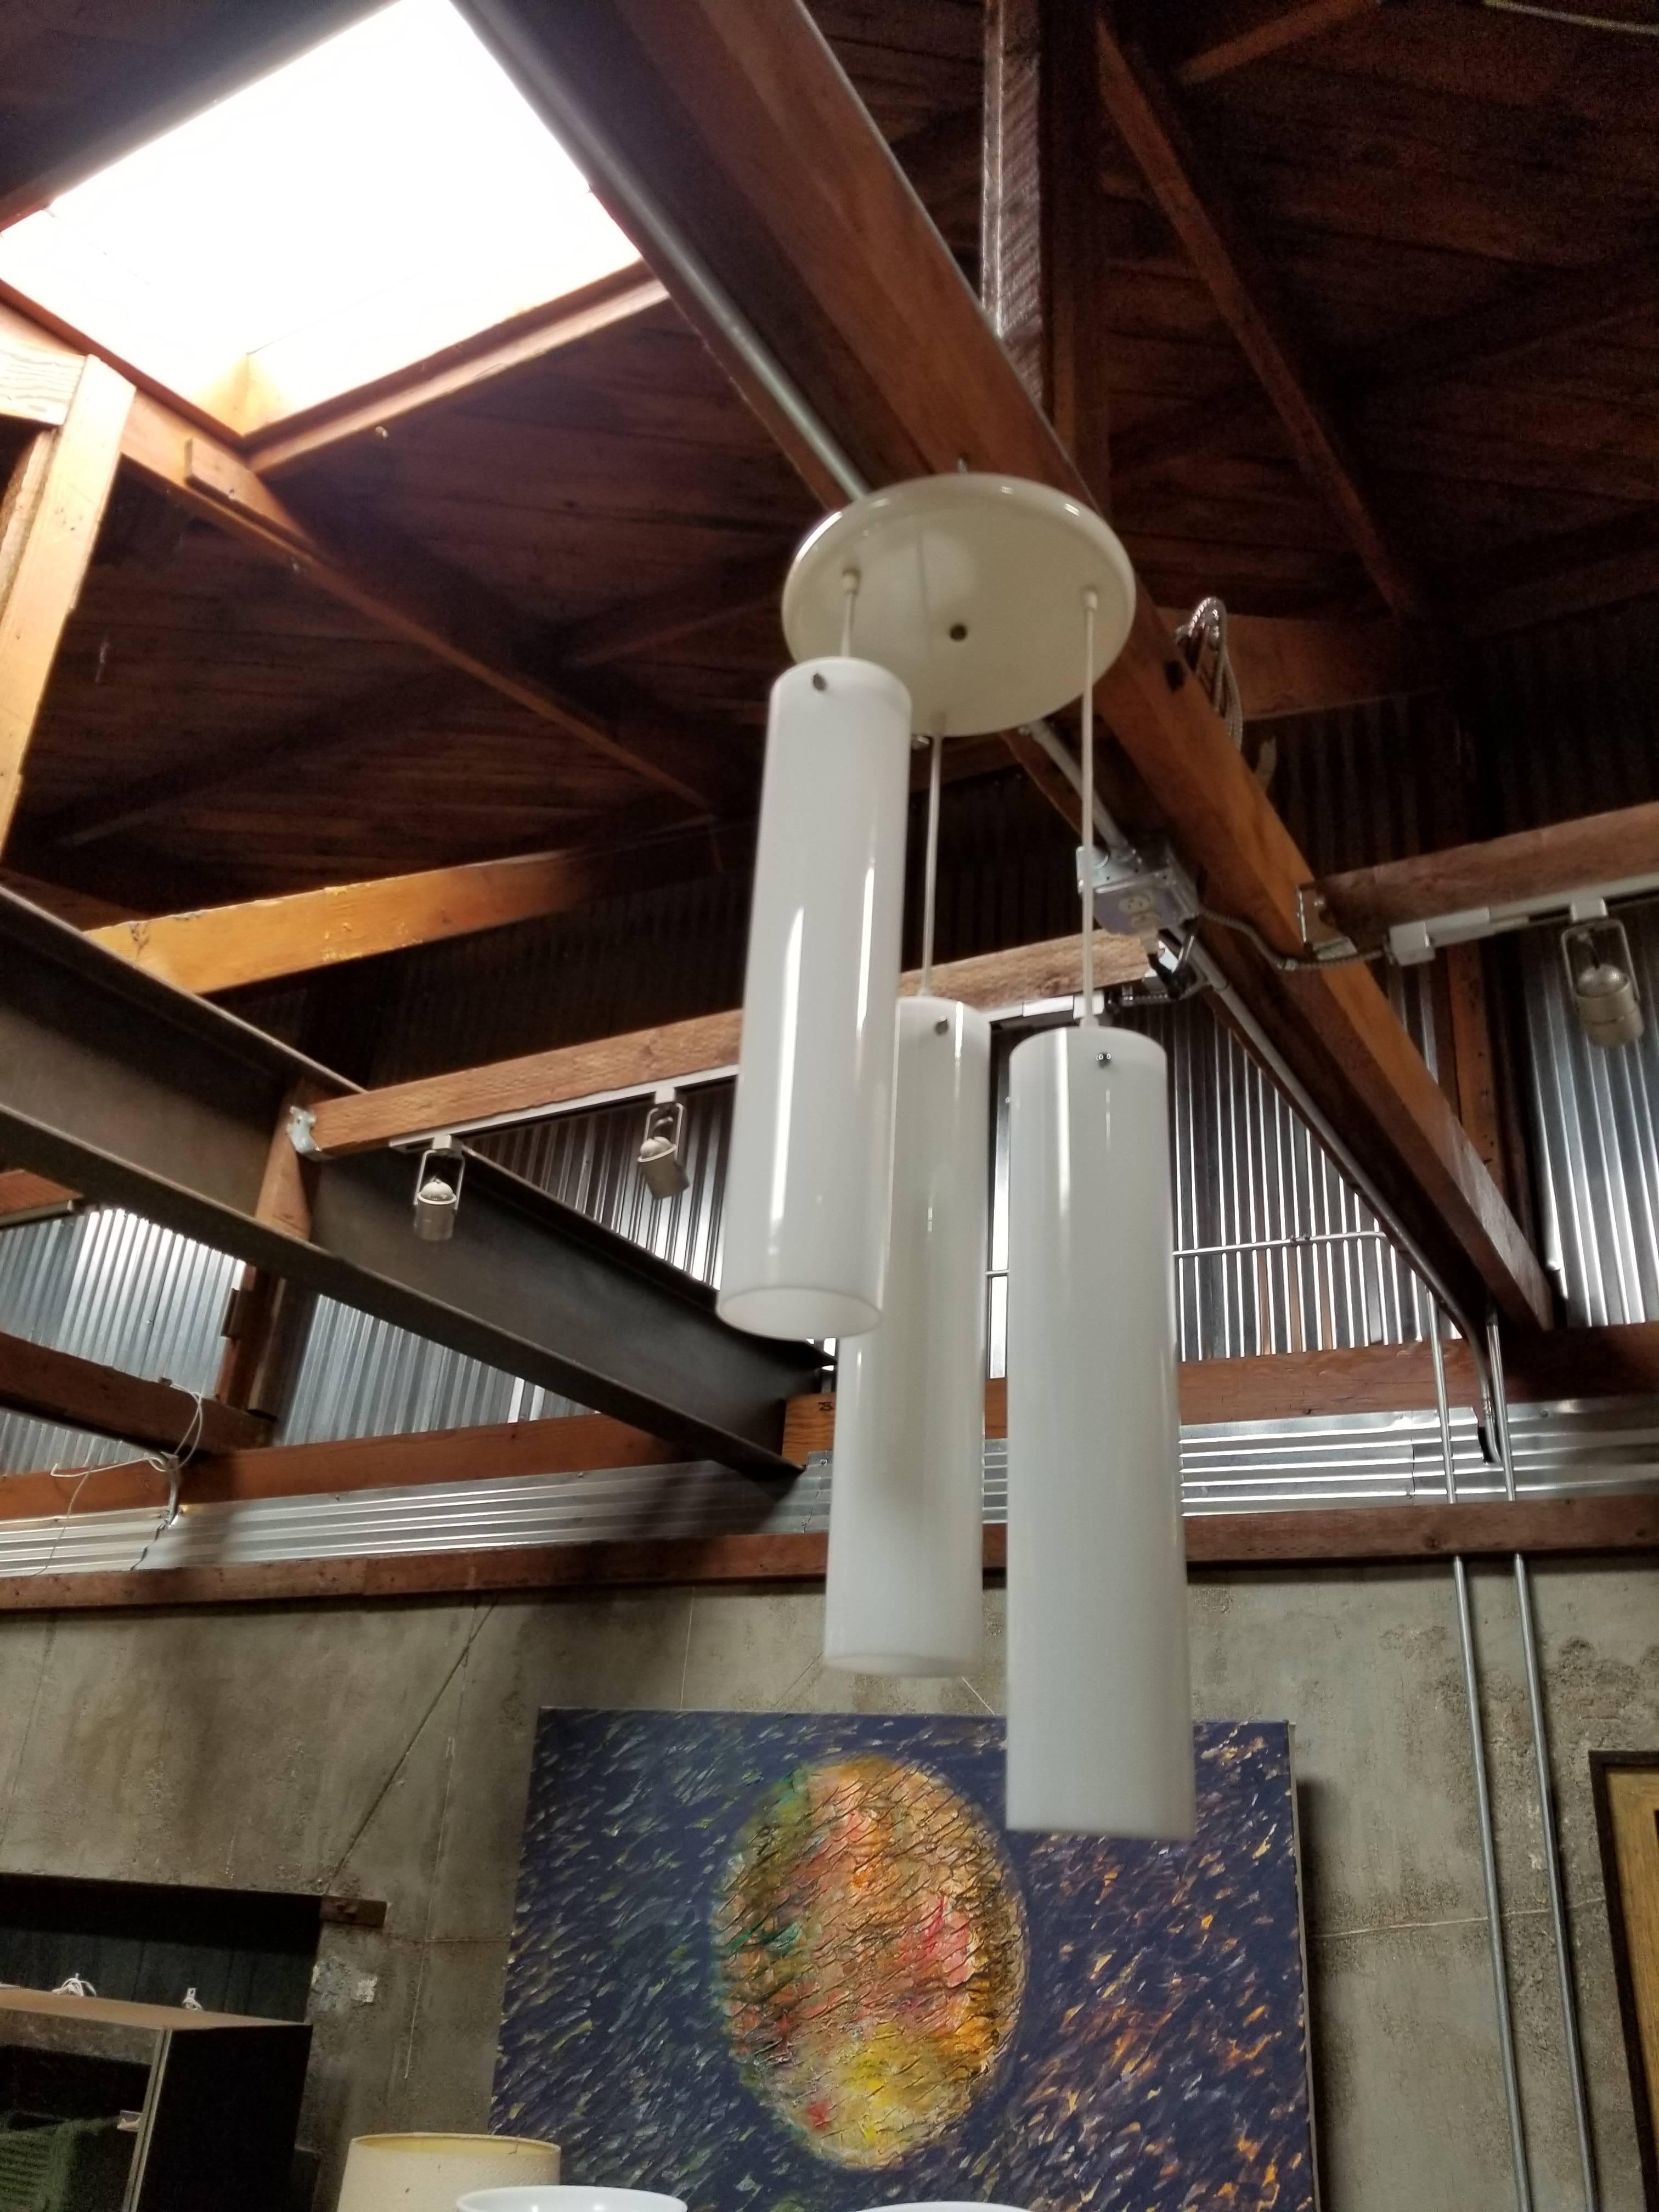 Paul Mayen for Habitat Cylindrical Chandelier In Excellent Condition For Sale In Fulton, CA